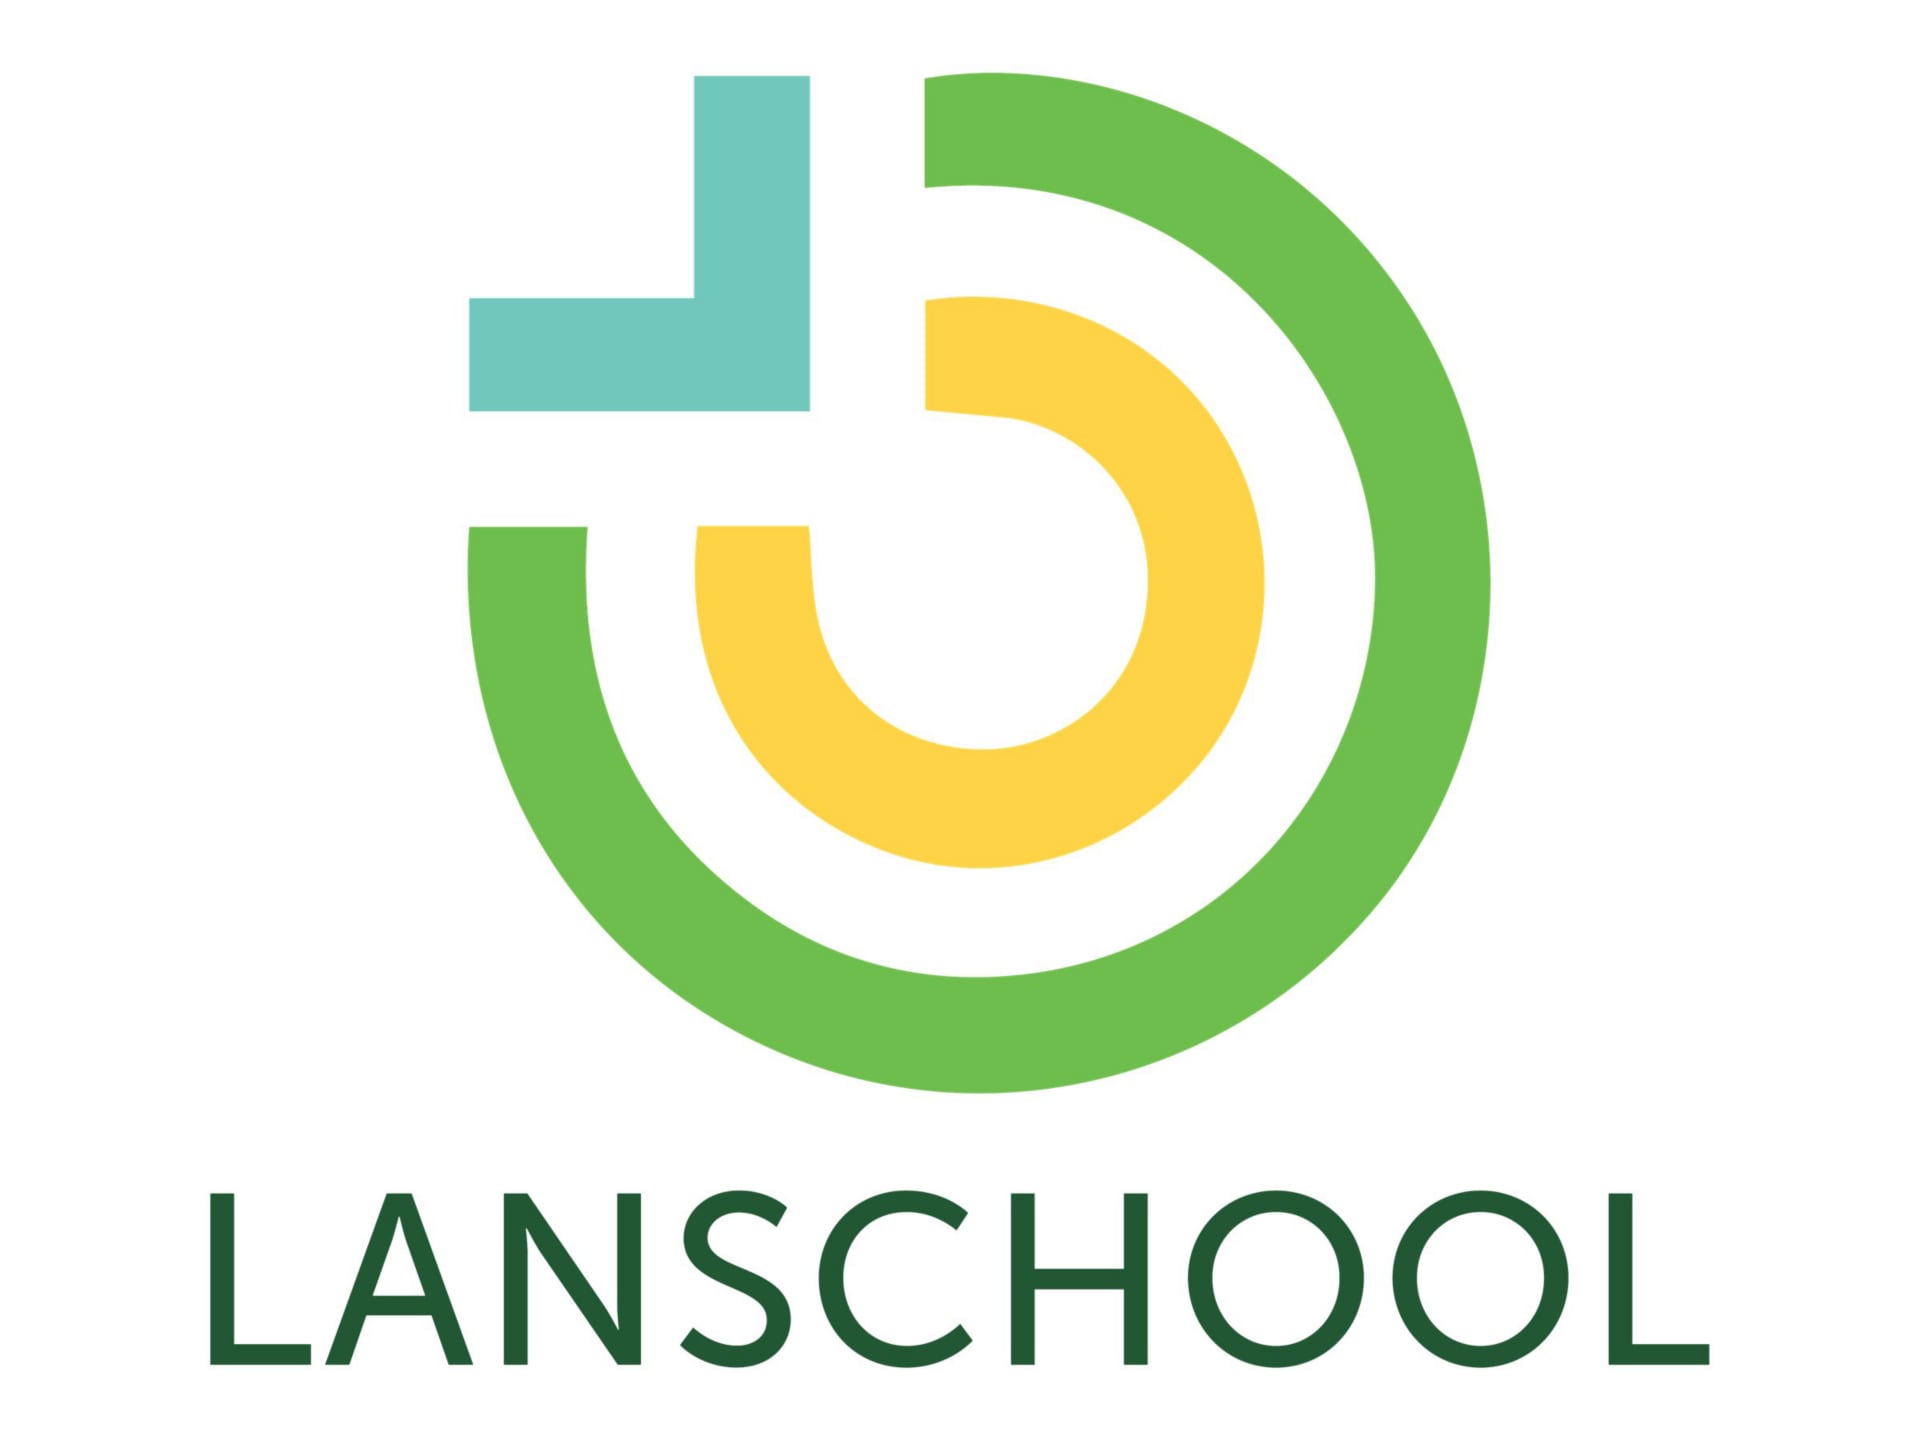 LanSchool - Site License (subscription license) (1 year) + Technical Support - 1 school (up to 500 devices)